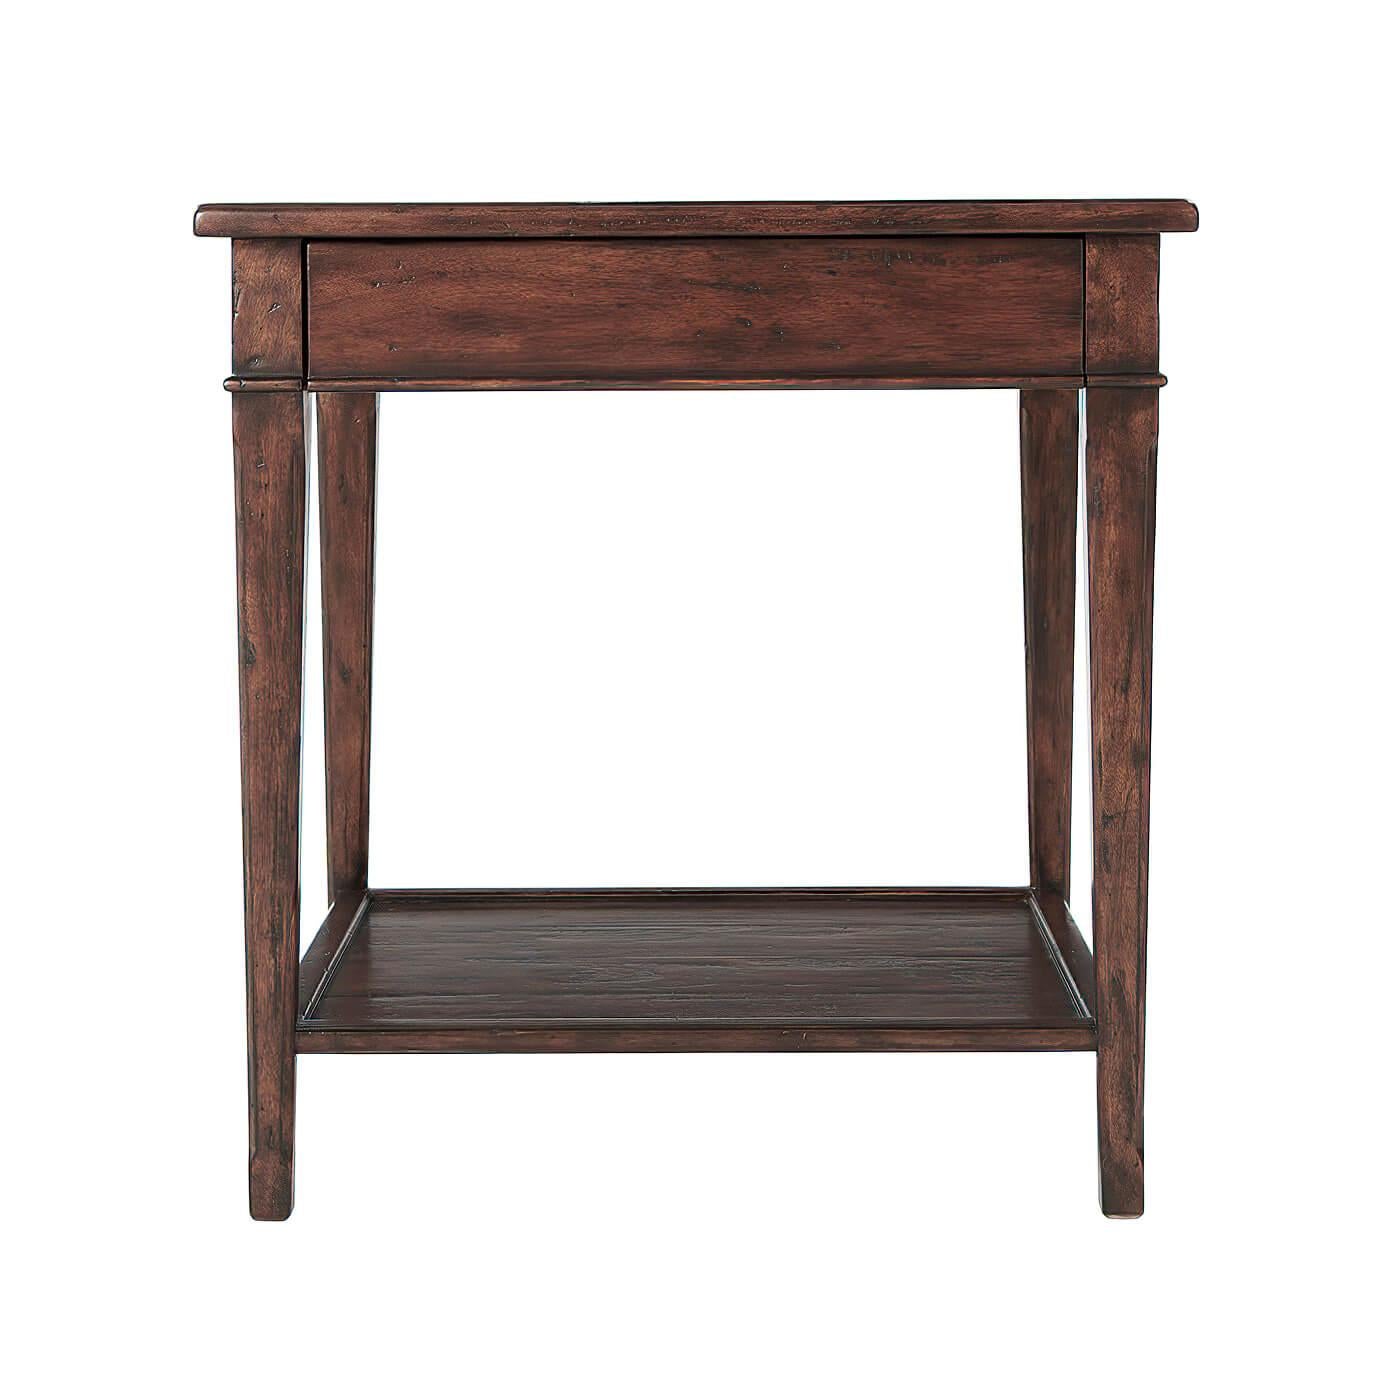 A French Provincial rustic antiqued wood bedside or end table, with a frieze drawer and the square tapering legs joined by an under tier. 

Dimensions: 26